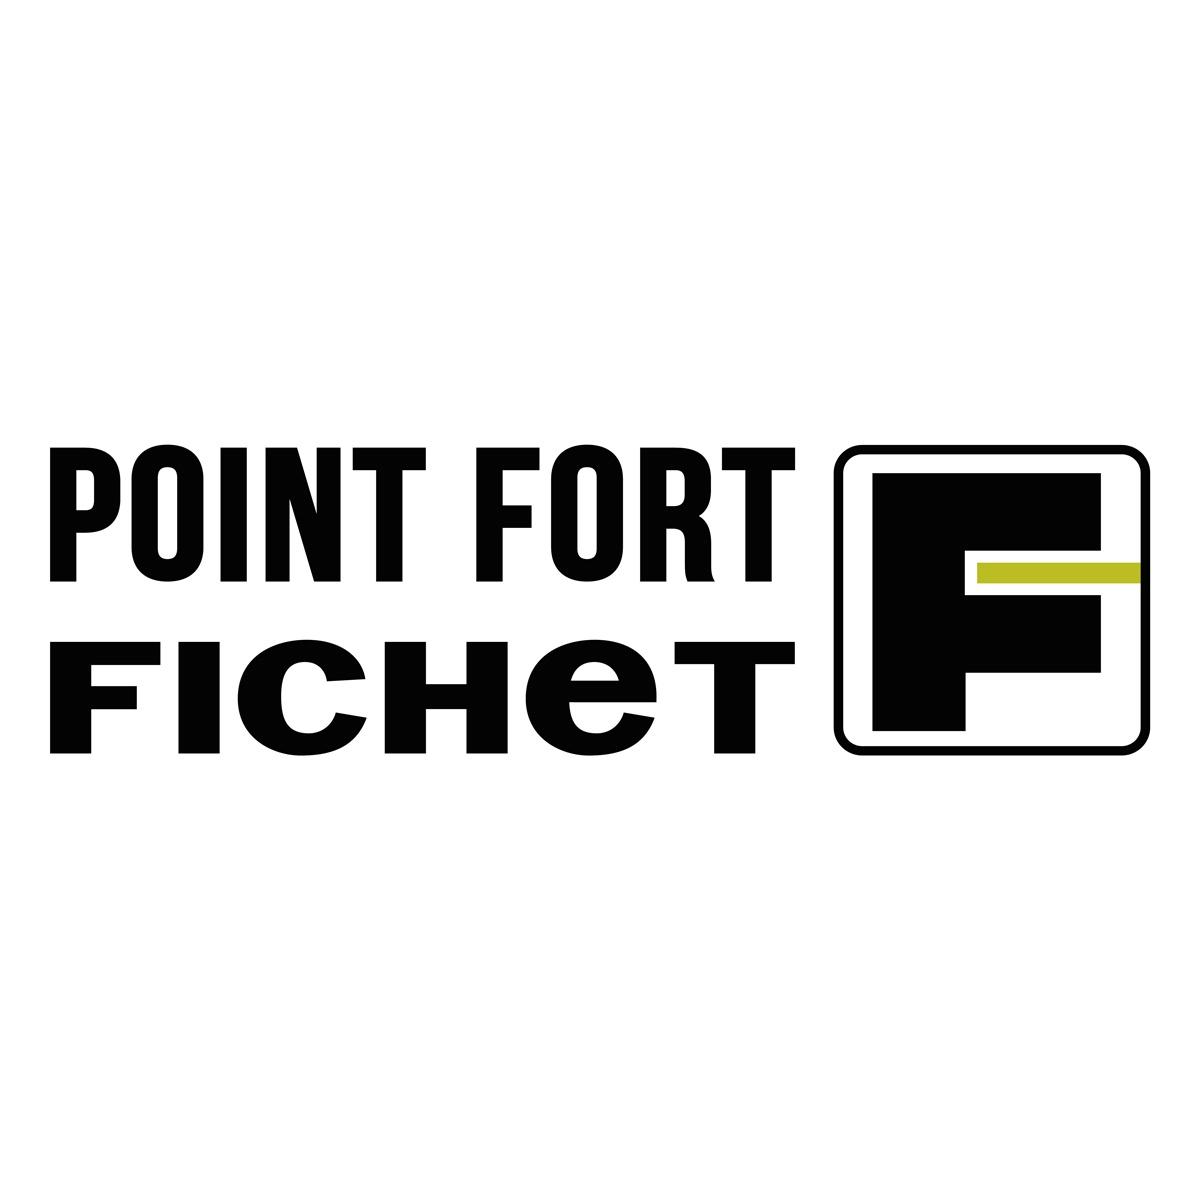 Darnis Sa - Point Fort Fichet  Valence